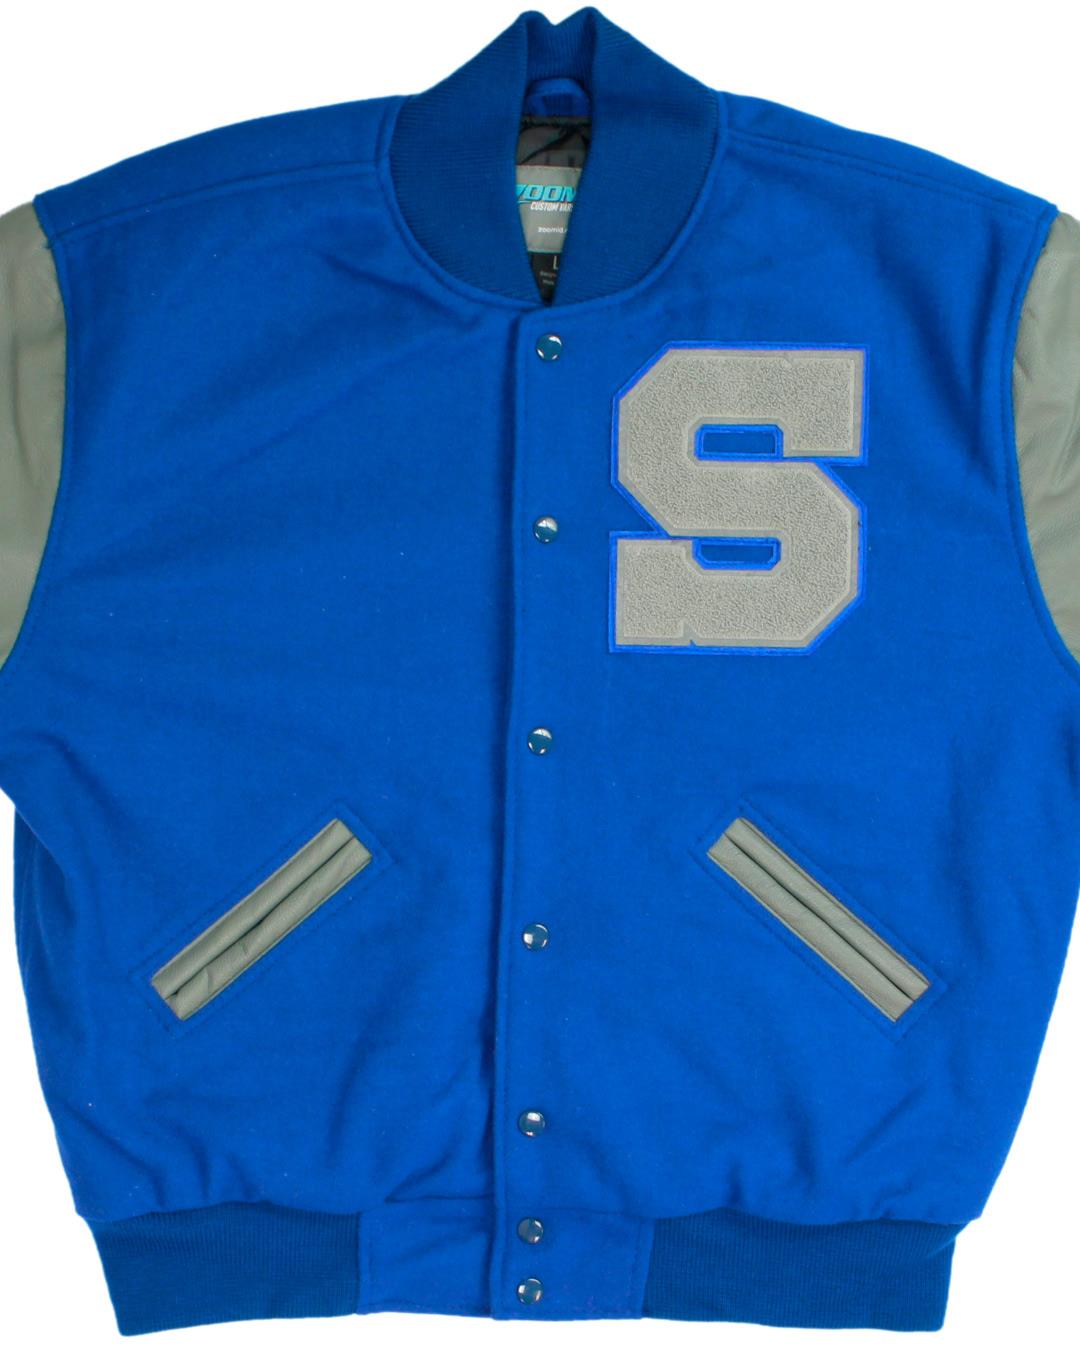 South High School Letterman, Columbus, OH - Front (1)